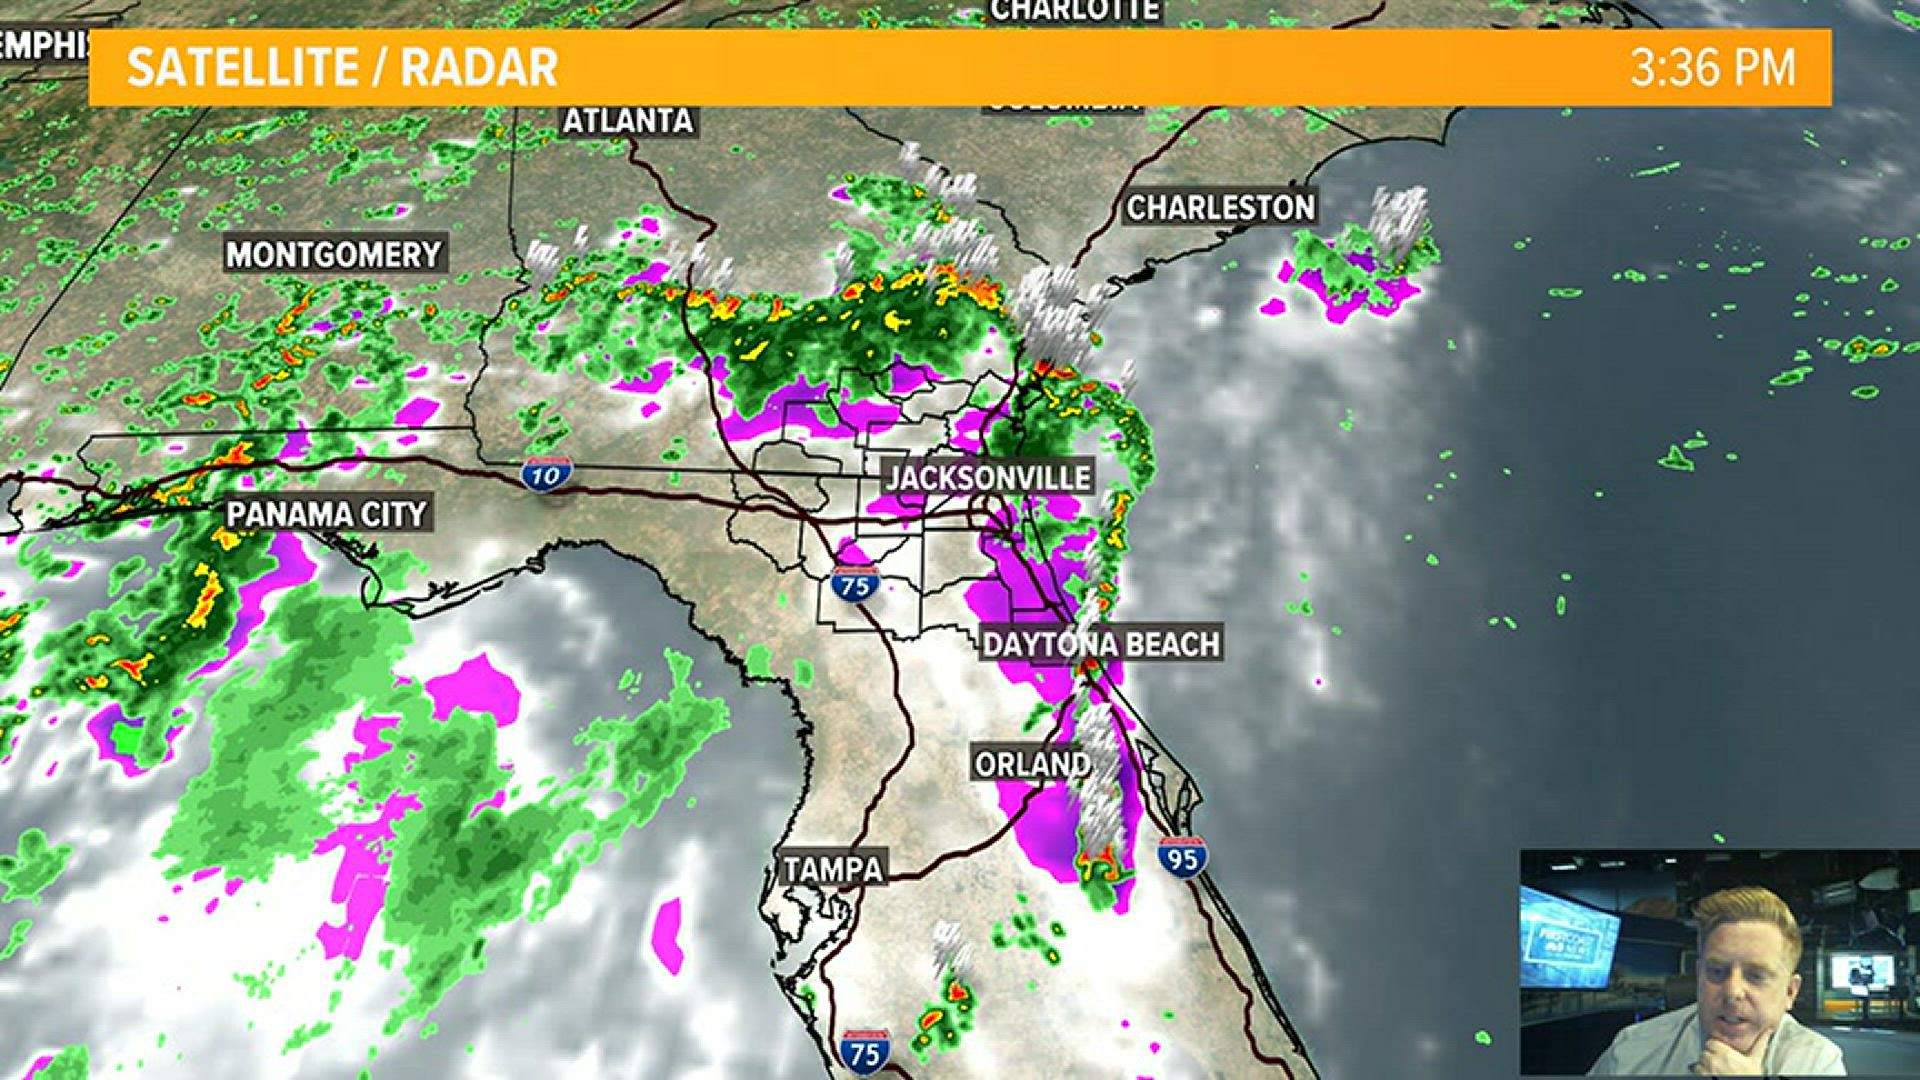 Tracking an approaching front this weekend to bring rainfall across the First Coast.